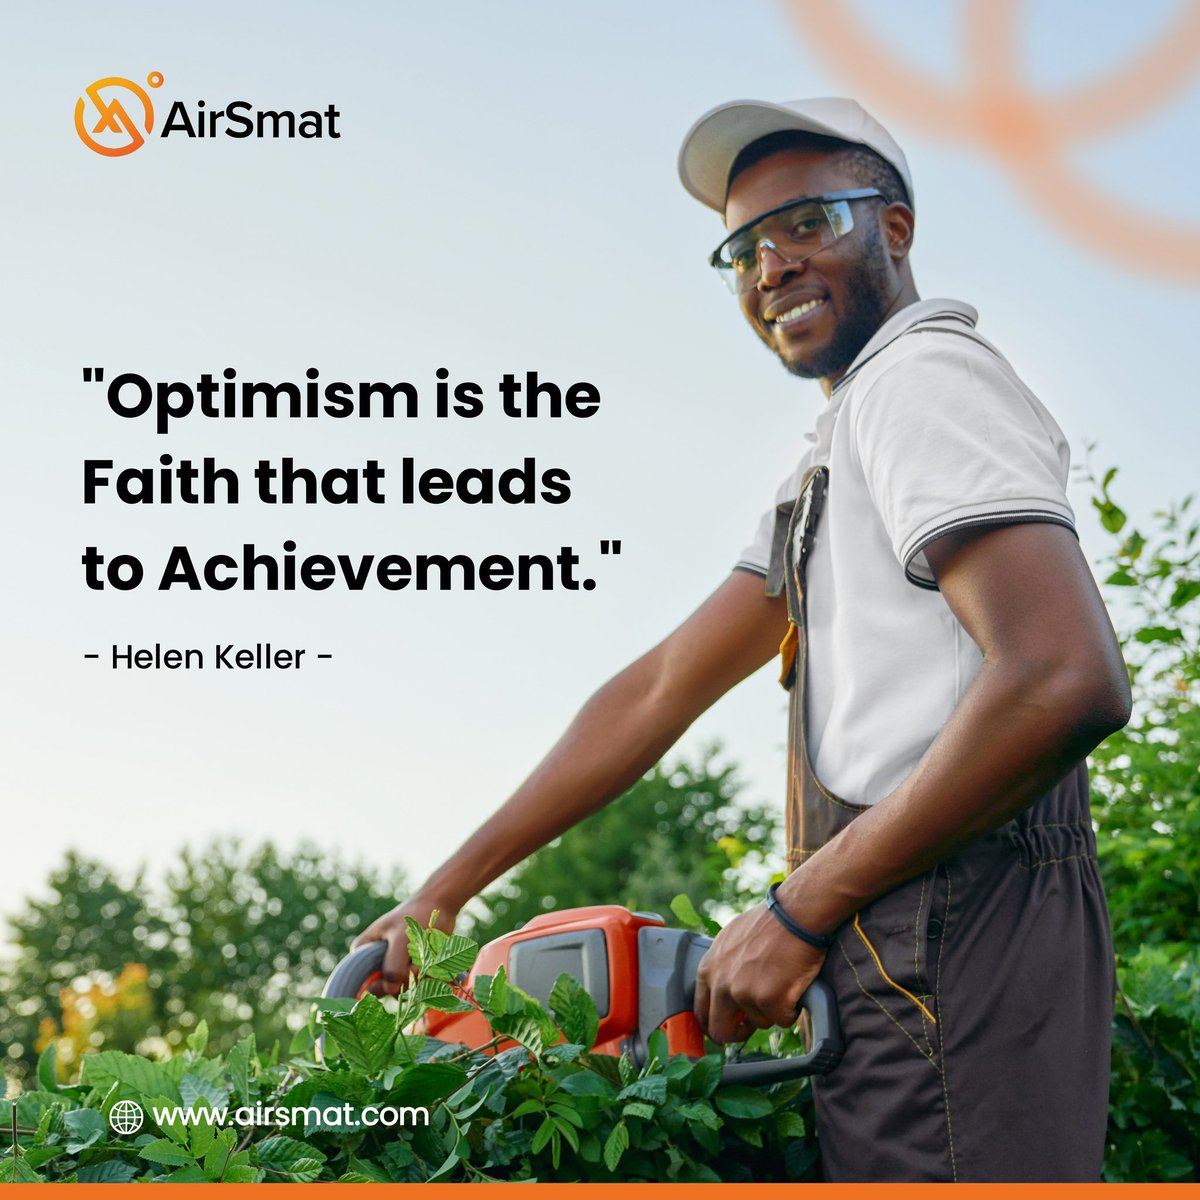 The start of a new week is a chance to continue the good work we've been doing. Let's keep cultivating, nurturing, and harvesting the fruits of our labour. May this week be bountiful and full of fulfillment. AirSmat is here to help you succeed! #AirSmat #MondayMotivation